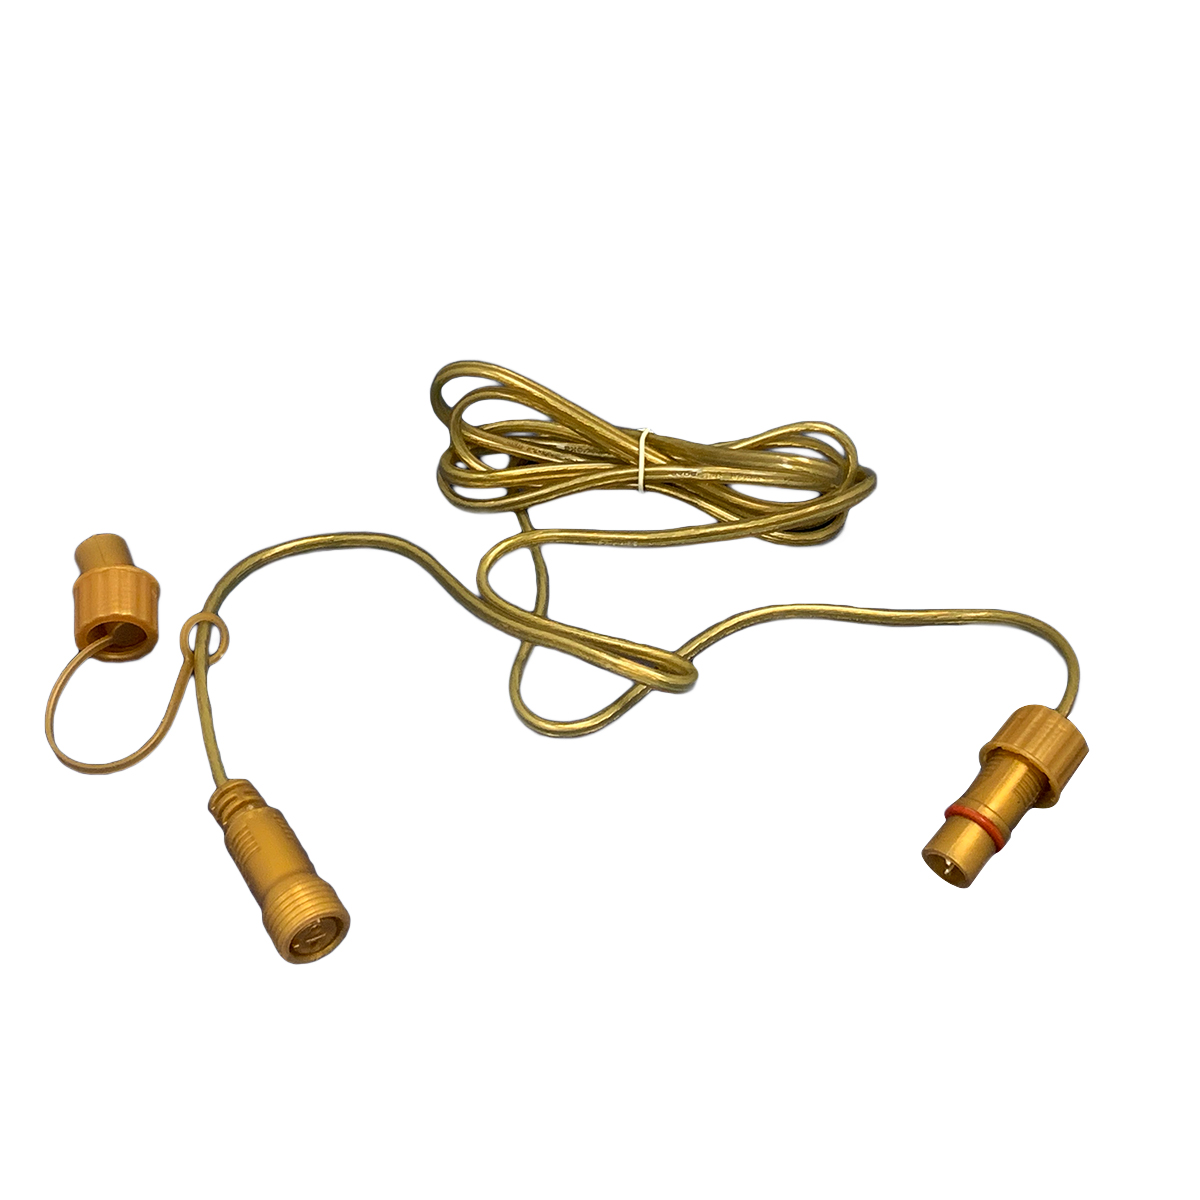 Extension Cable for PVC Christmas Light Strand - 79” - Gold